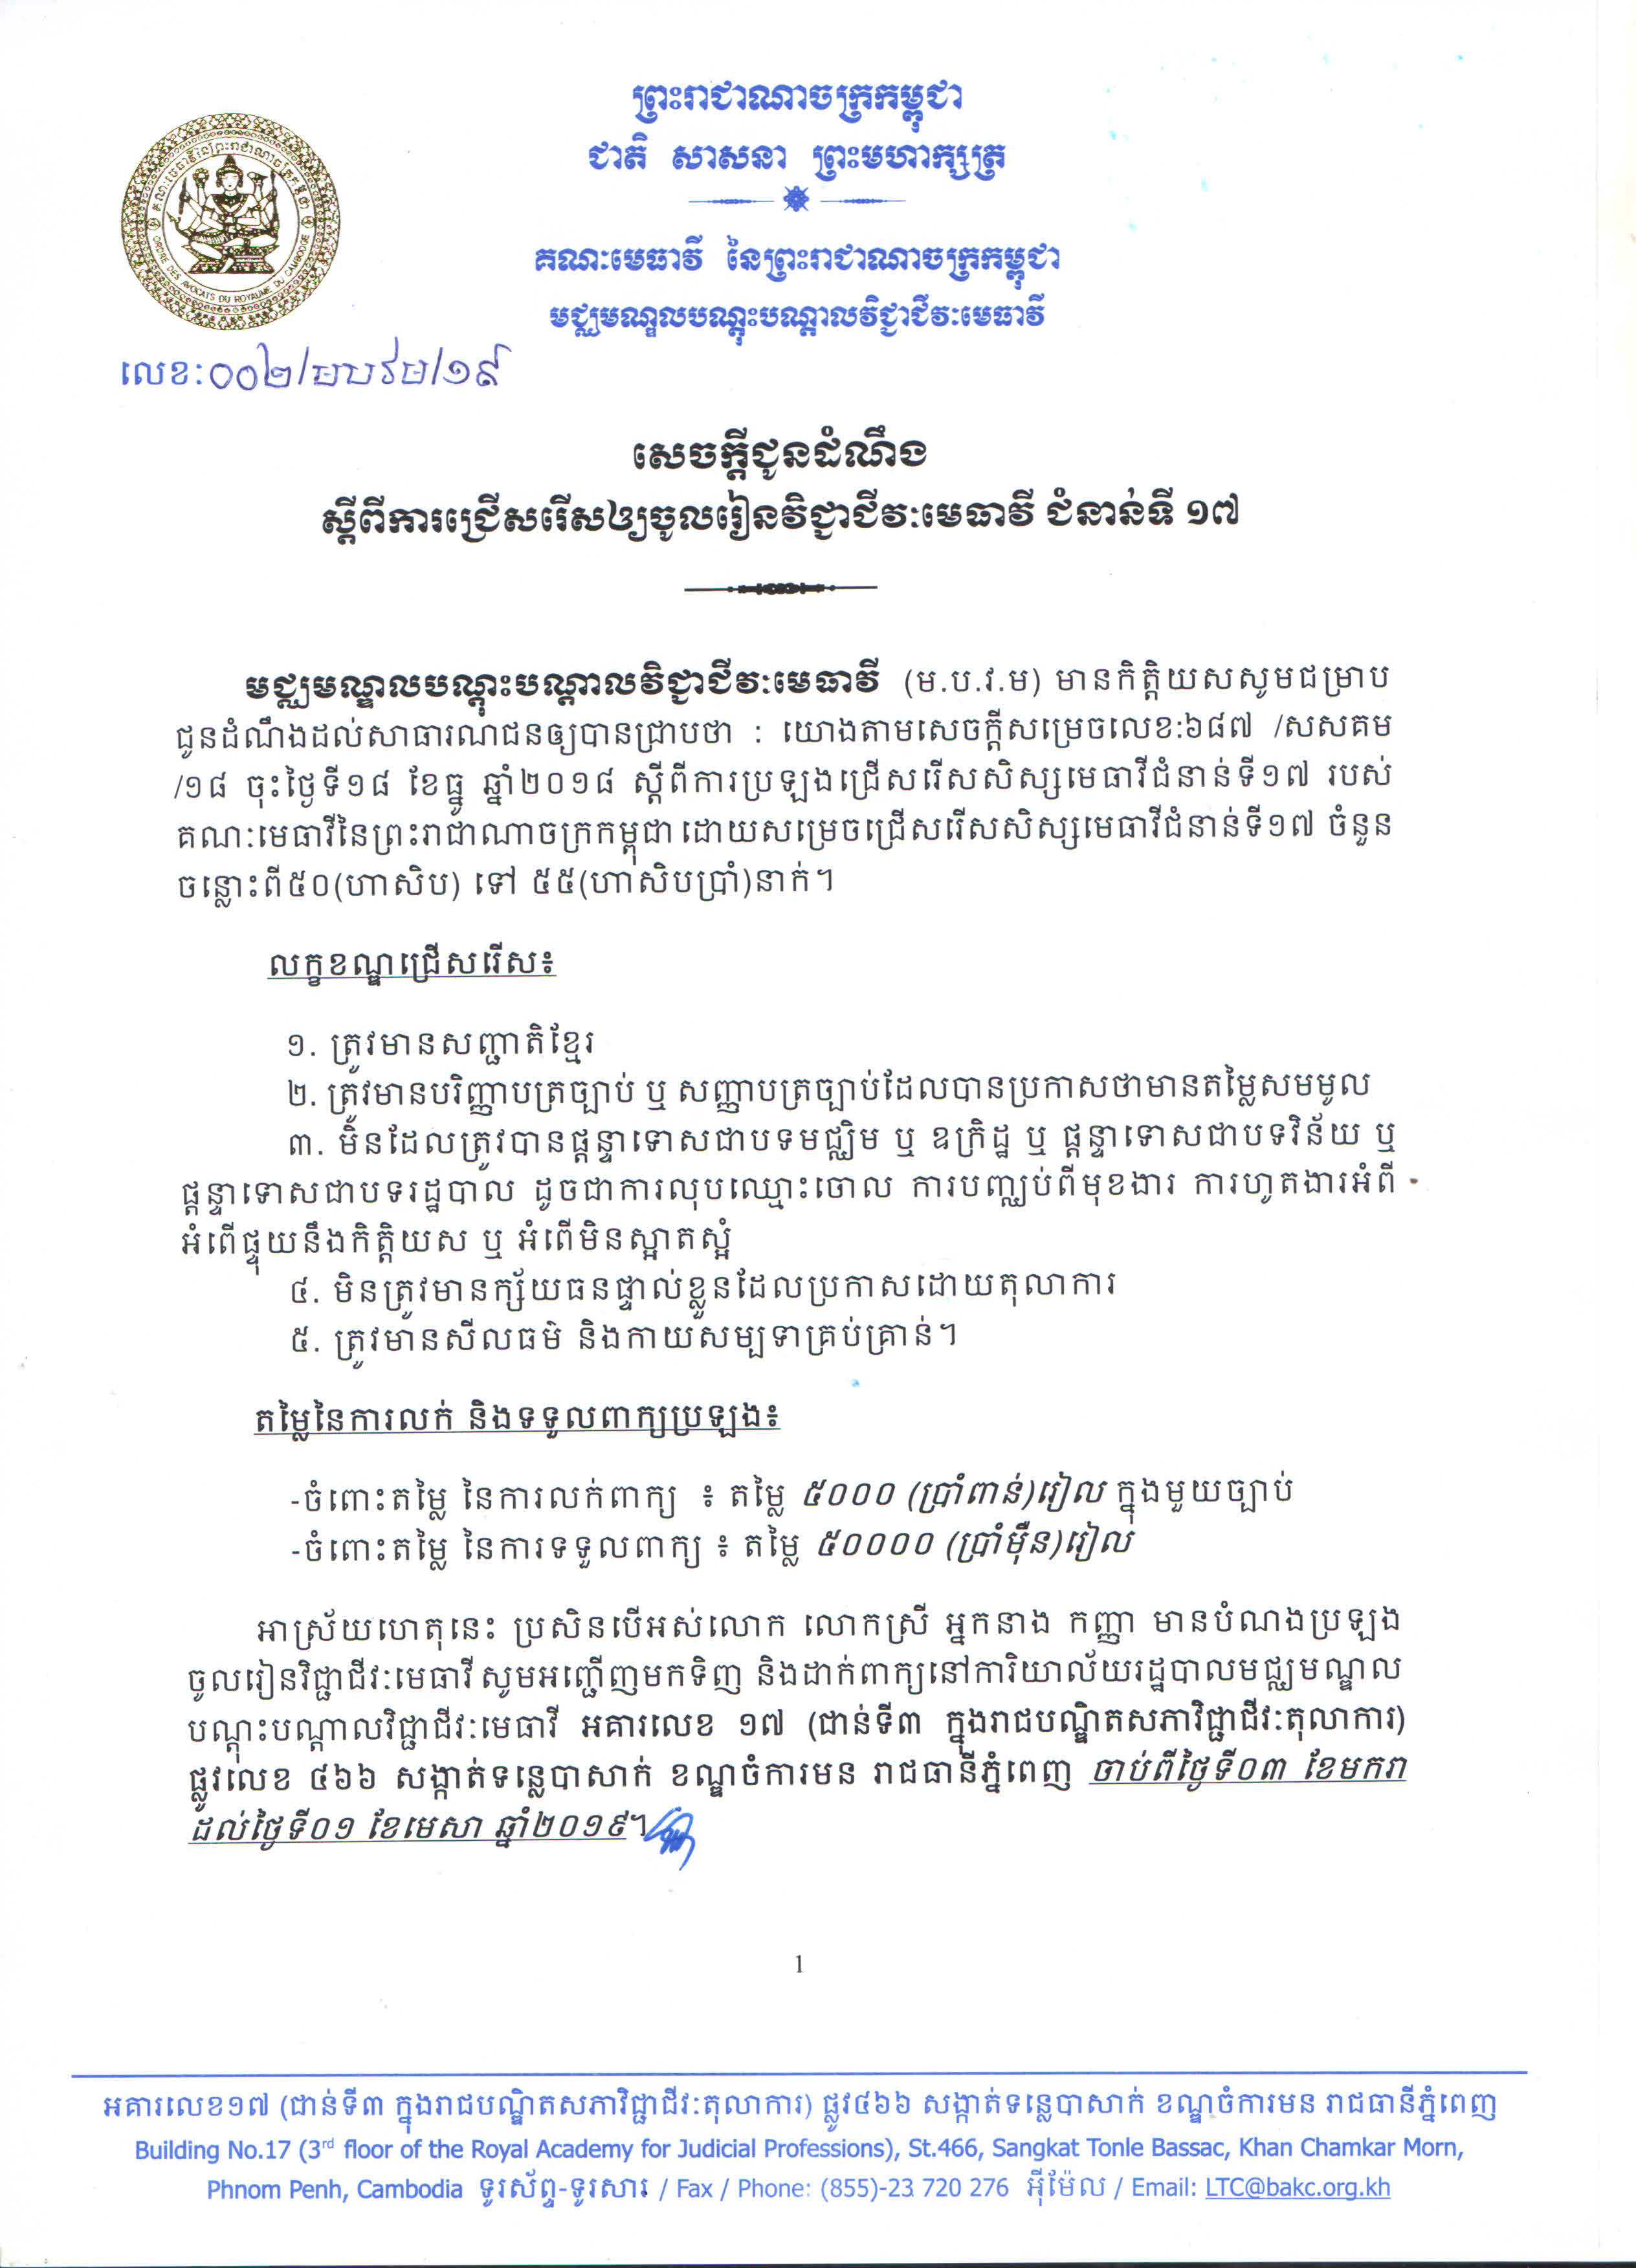 190103 002 Adm Anm សចកតជនដណង Page 1